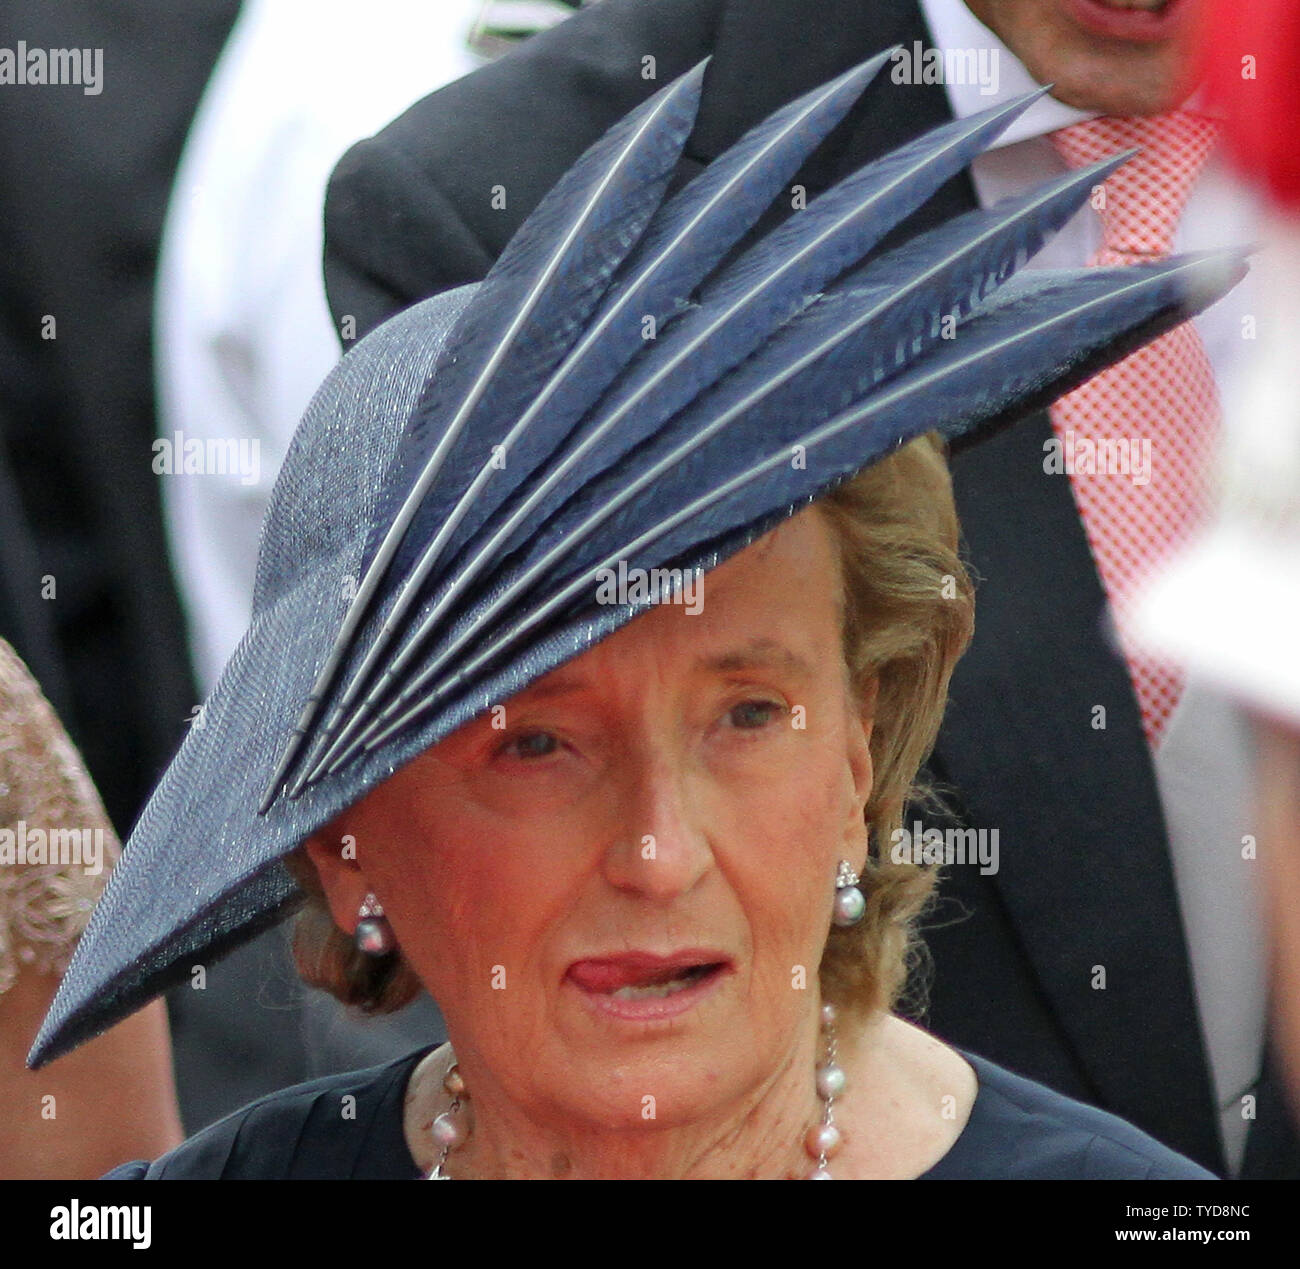 Bernadette Chirac arrives at the Prince's Palace for the religious marriage ceremony of Prince Albert II and Princess Charlene in Monte Carlo, Monaco on July 2, 2011.  The Prince and Princess took part in a civil wedding ceremony yesterday.   UPI/ David Silpa Stock Photo